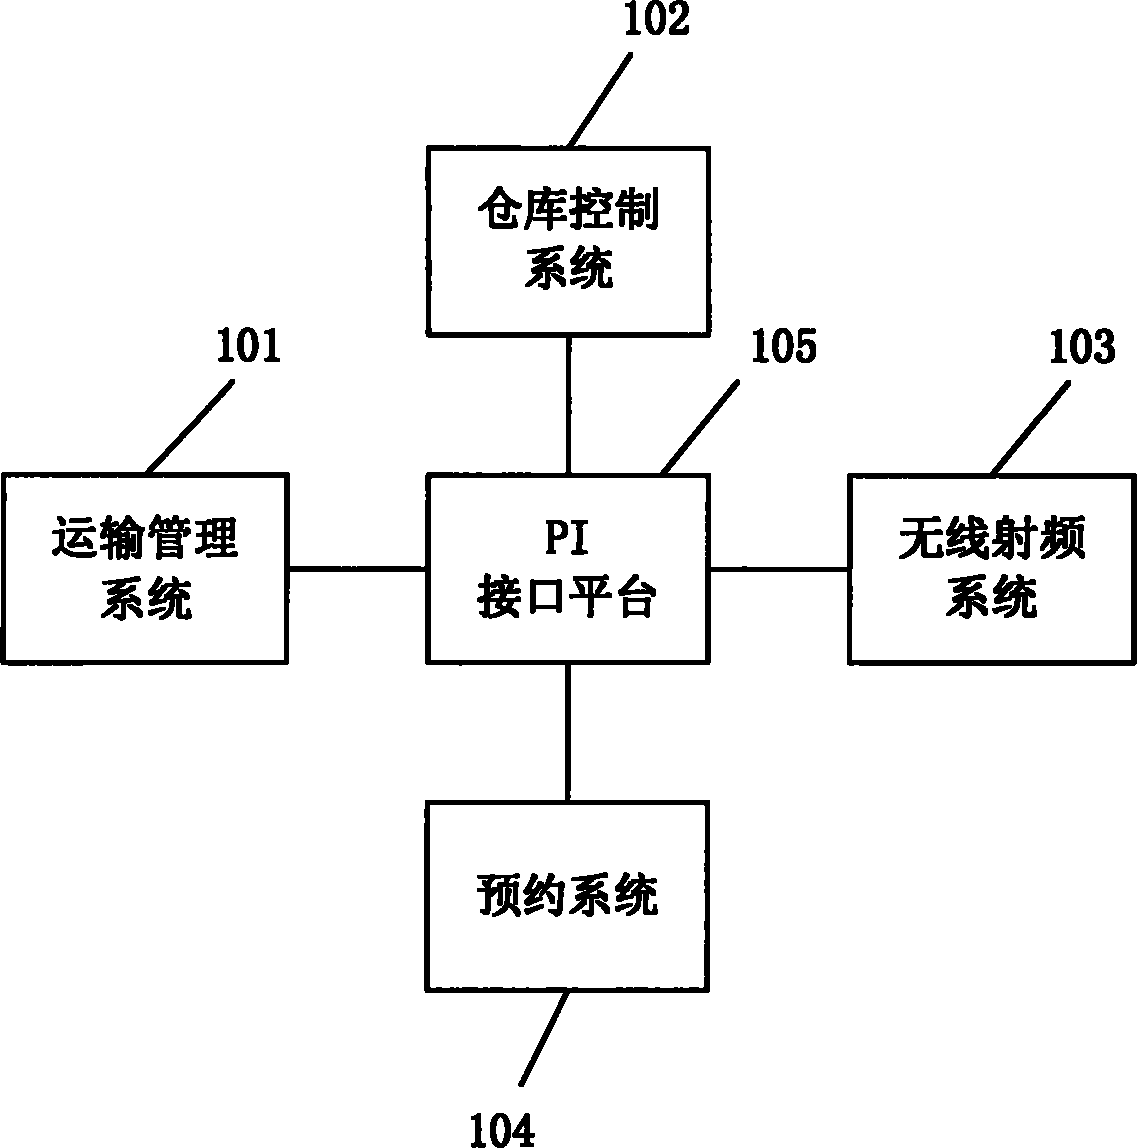 Method and system for optimizing distributed collaborative loading